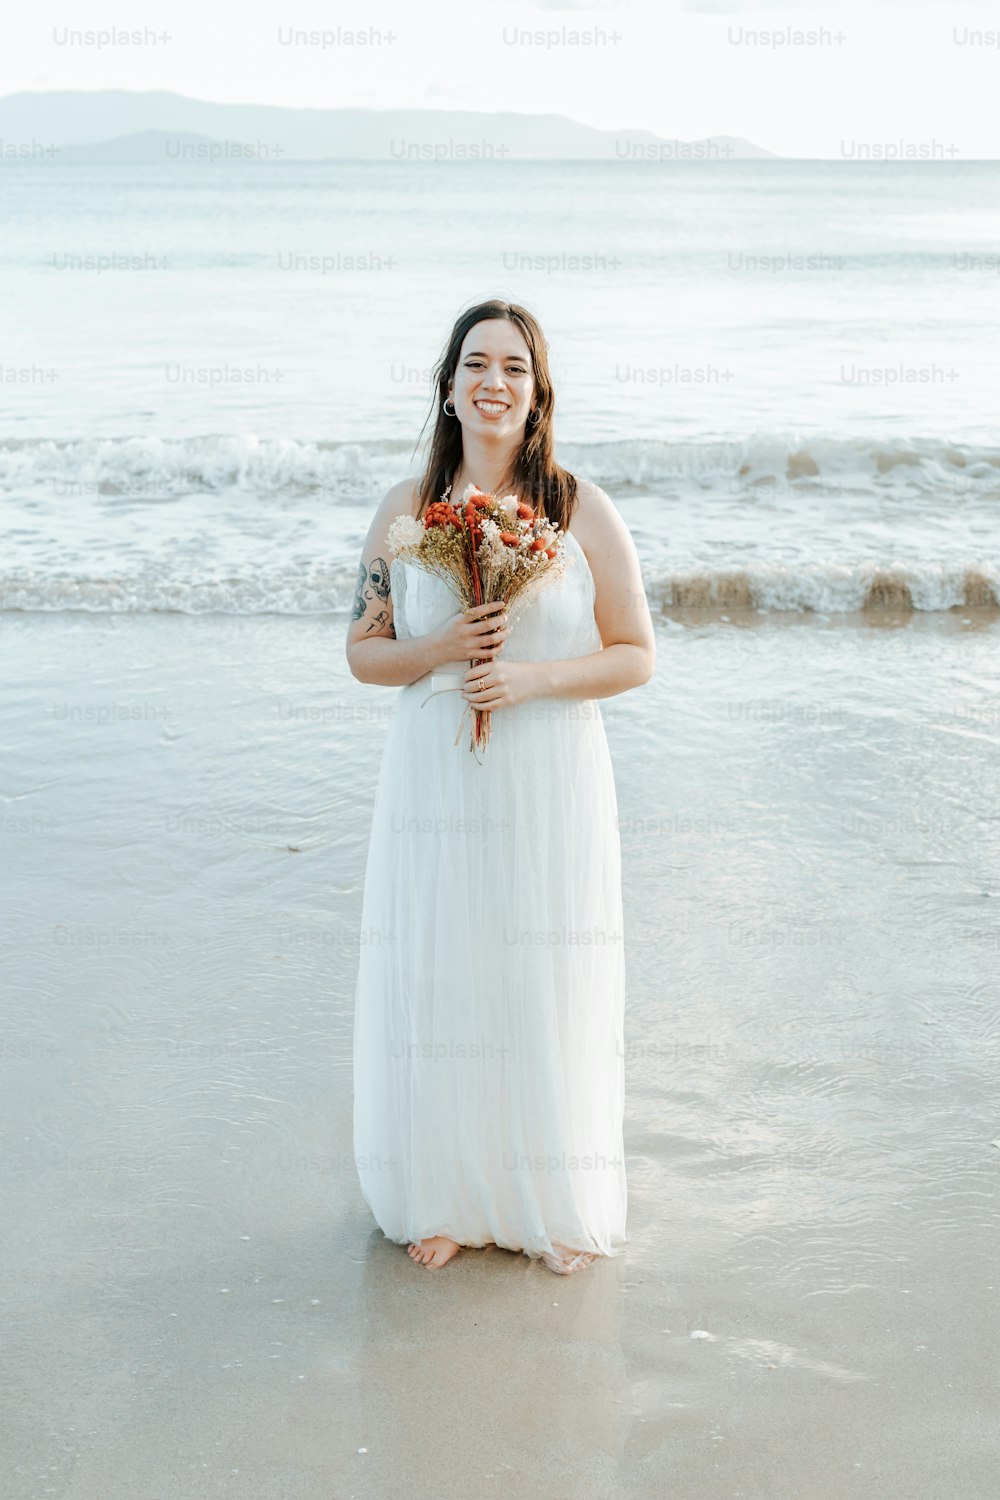 a woman standing on a beach holding a bouquet of flowers